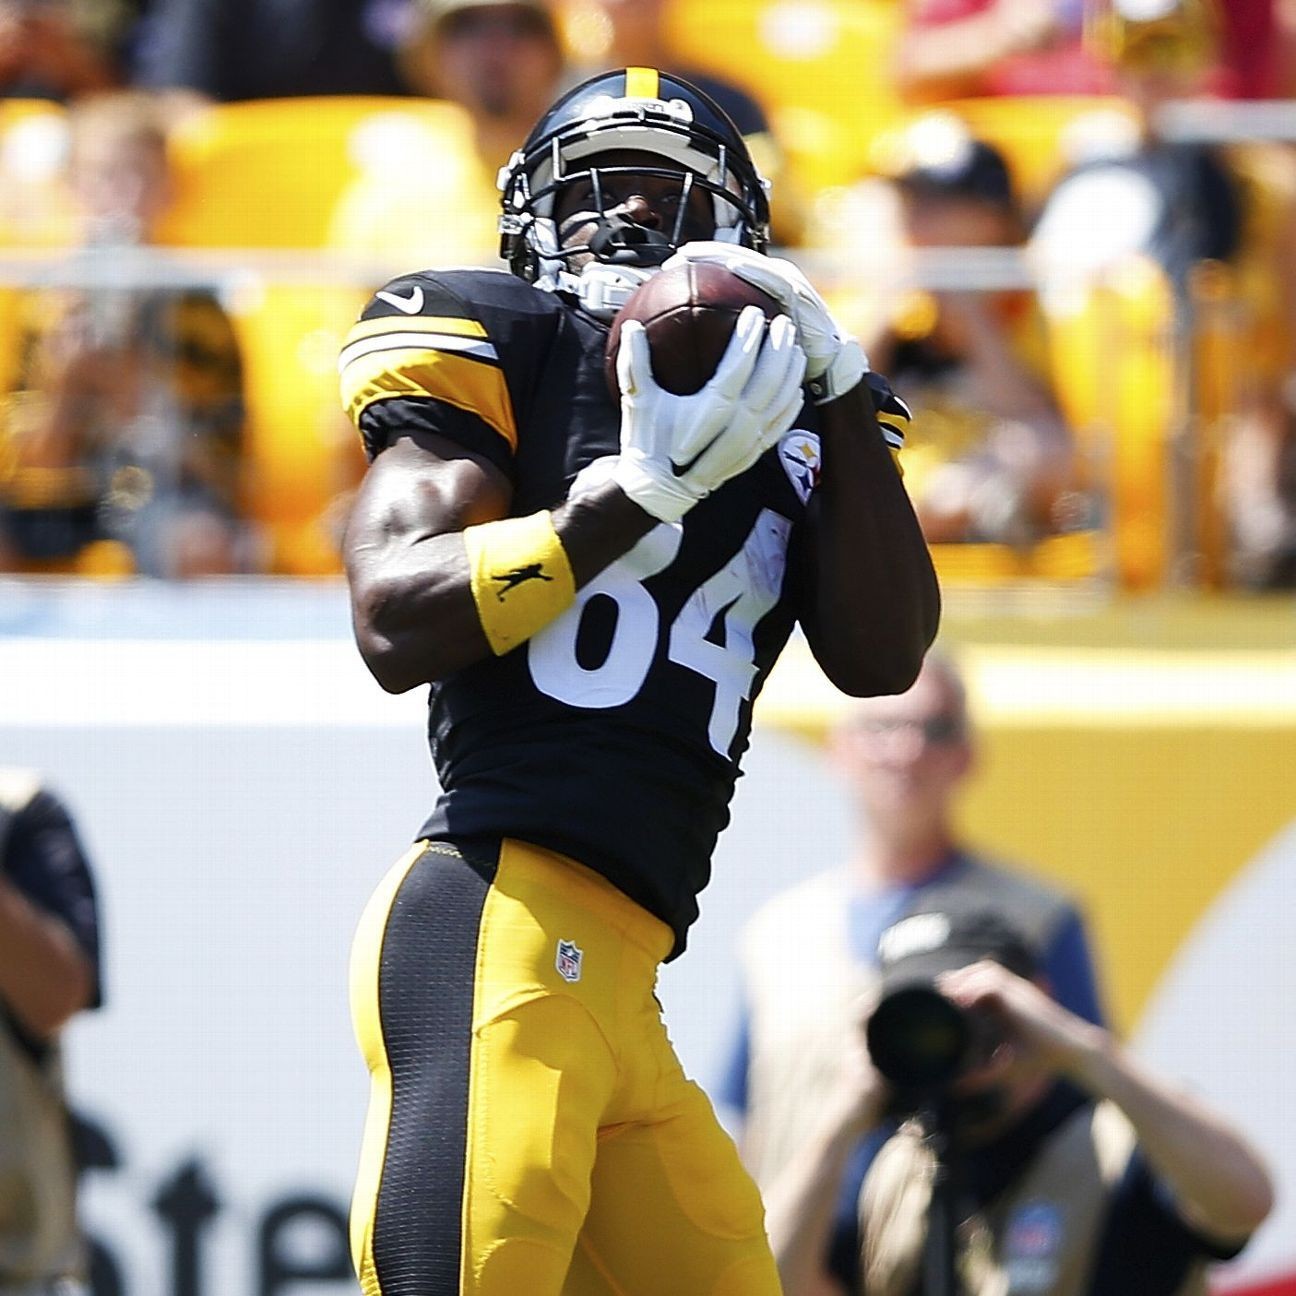 Antonio Brown could ask Steelers about contract next offseason, too